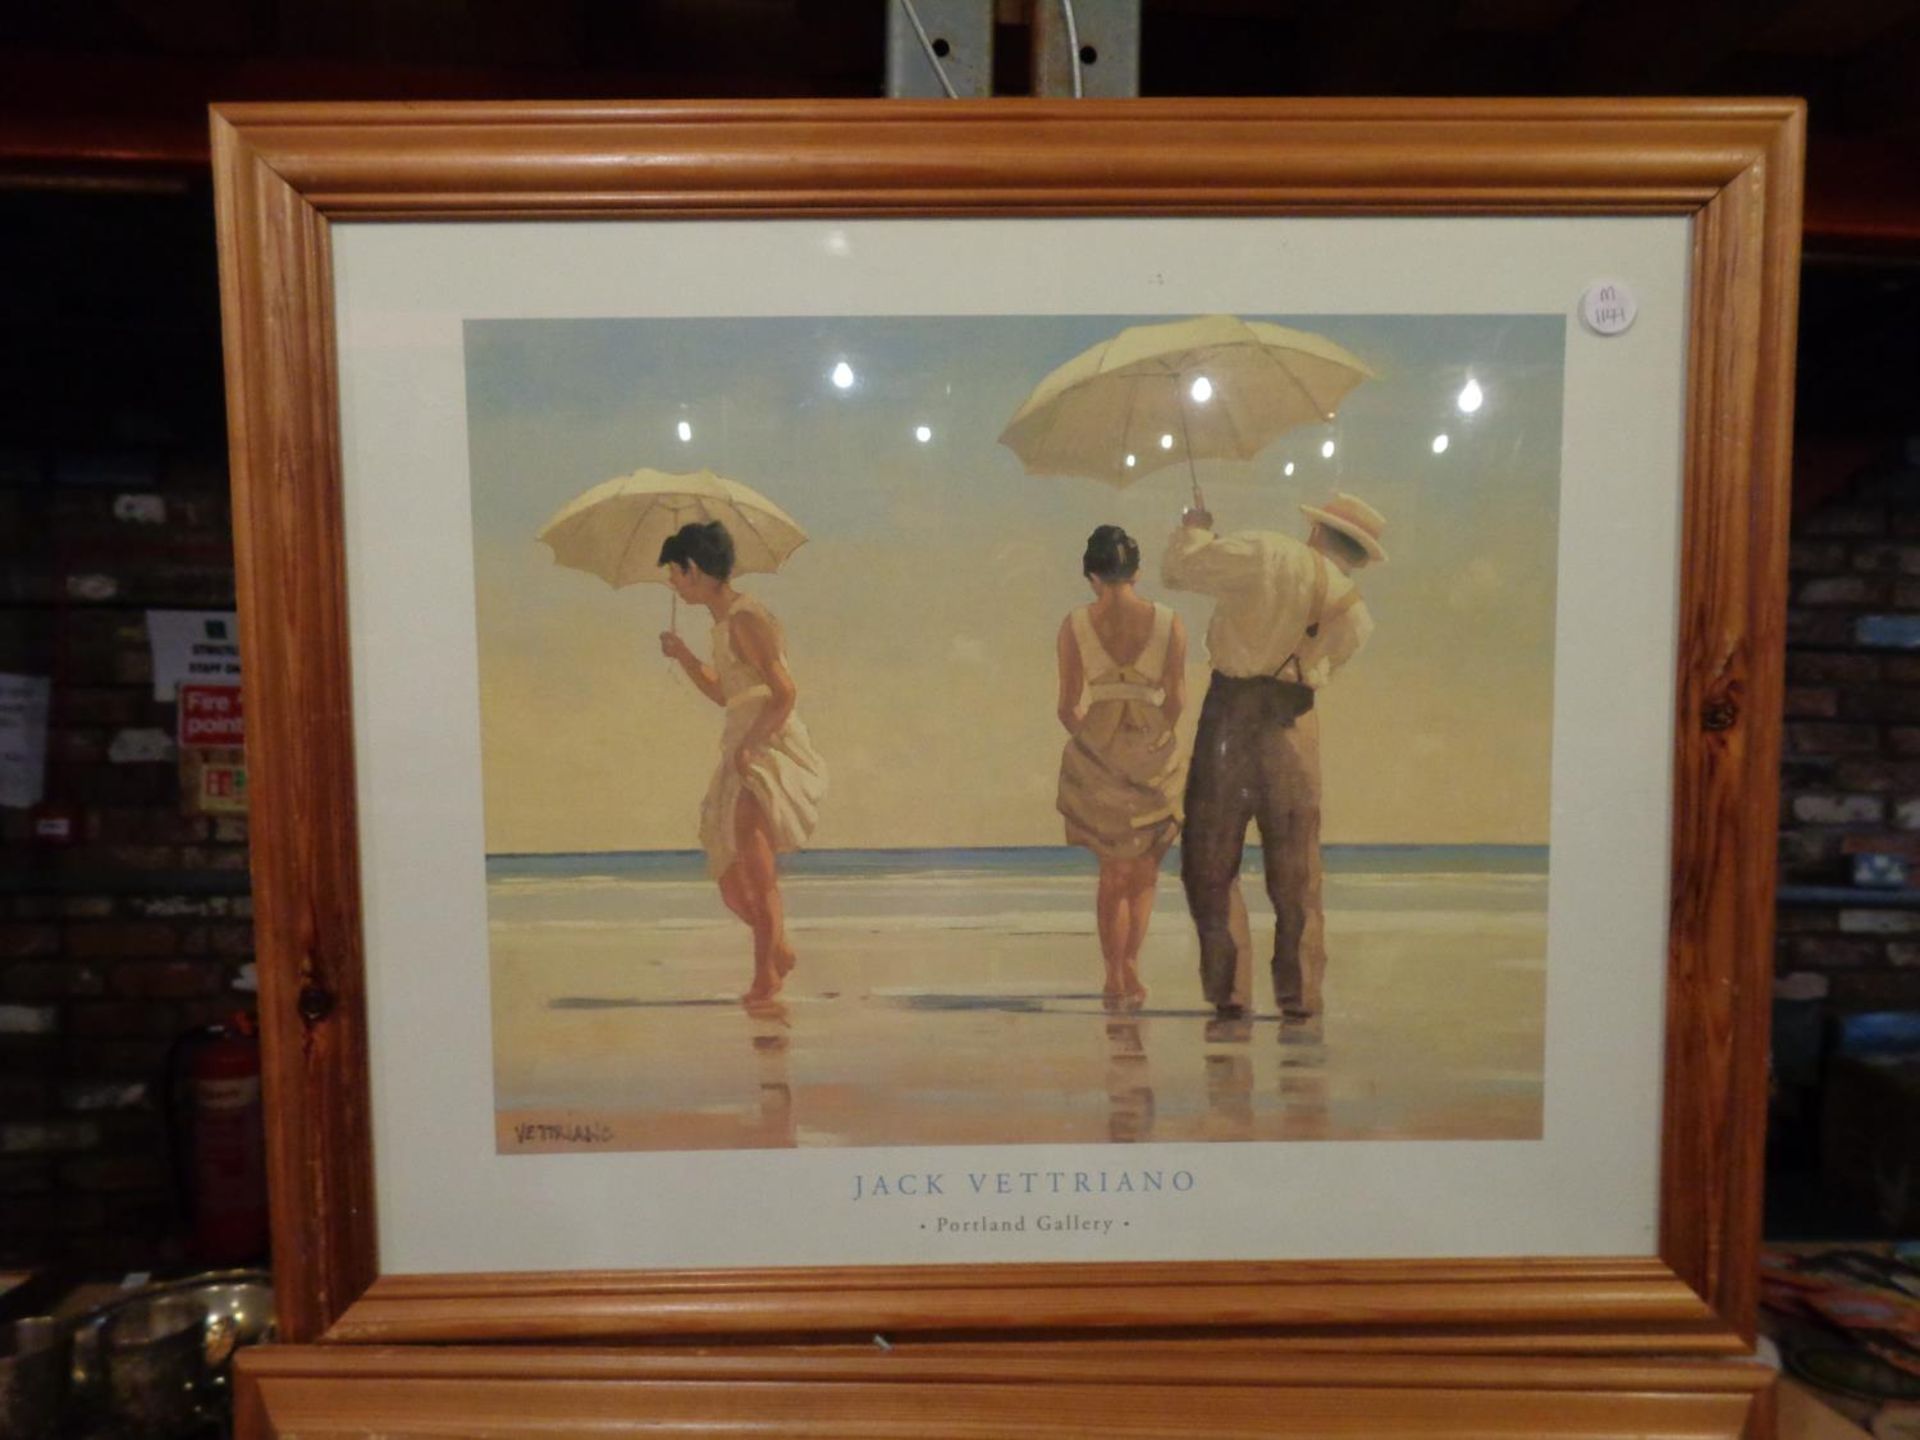 TWO FRAMED PRINTS BY JACK VETTRIANO DEPICTING SCENES OF PEOPLE DANCING ON A BEACH - Image 3 of 3